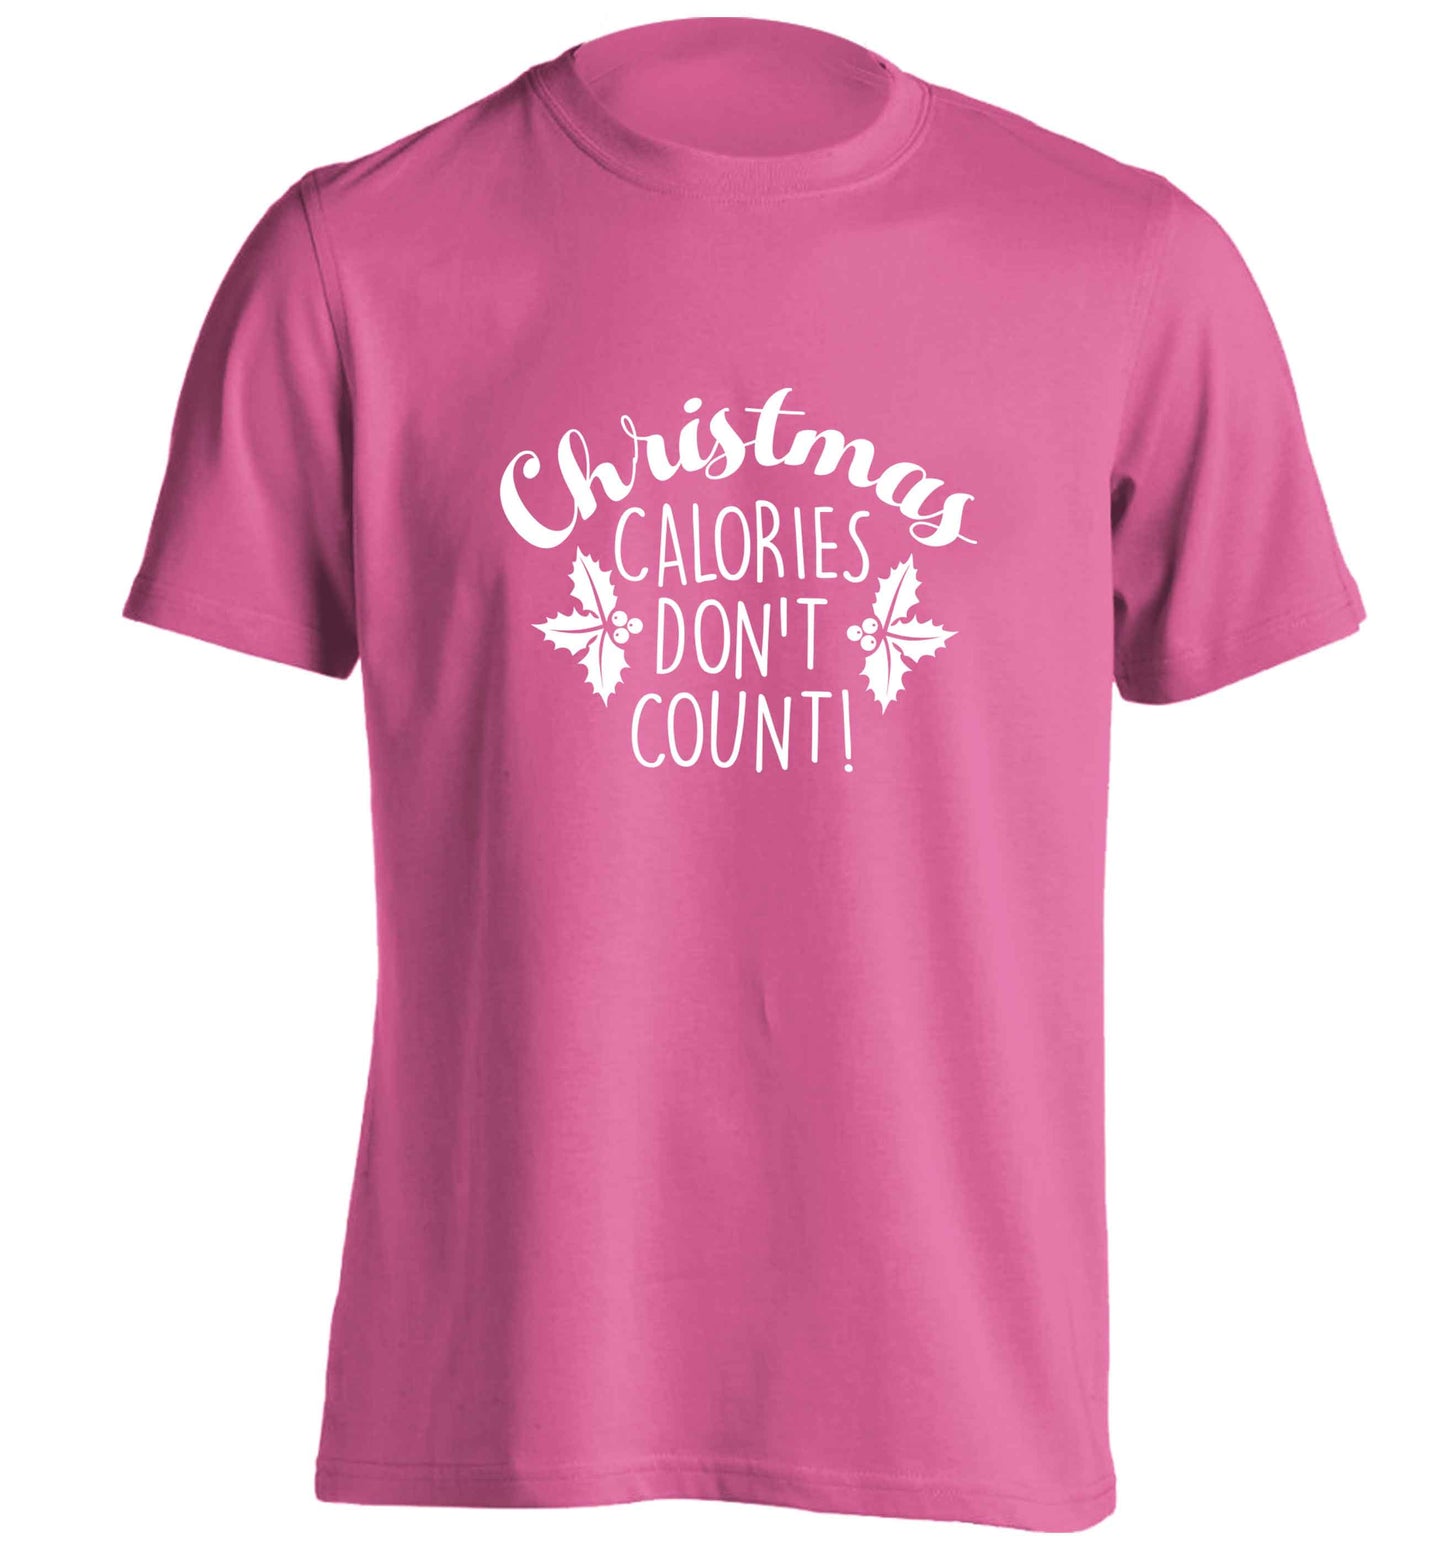 Christmas calories don't count adults unisex pink Tshirt 2XL